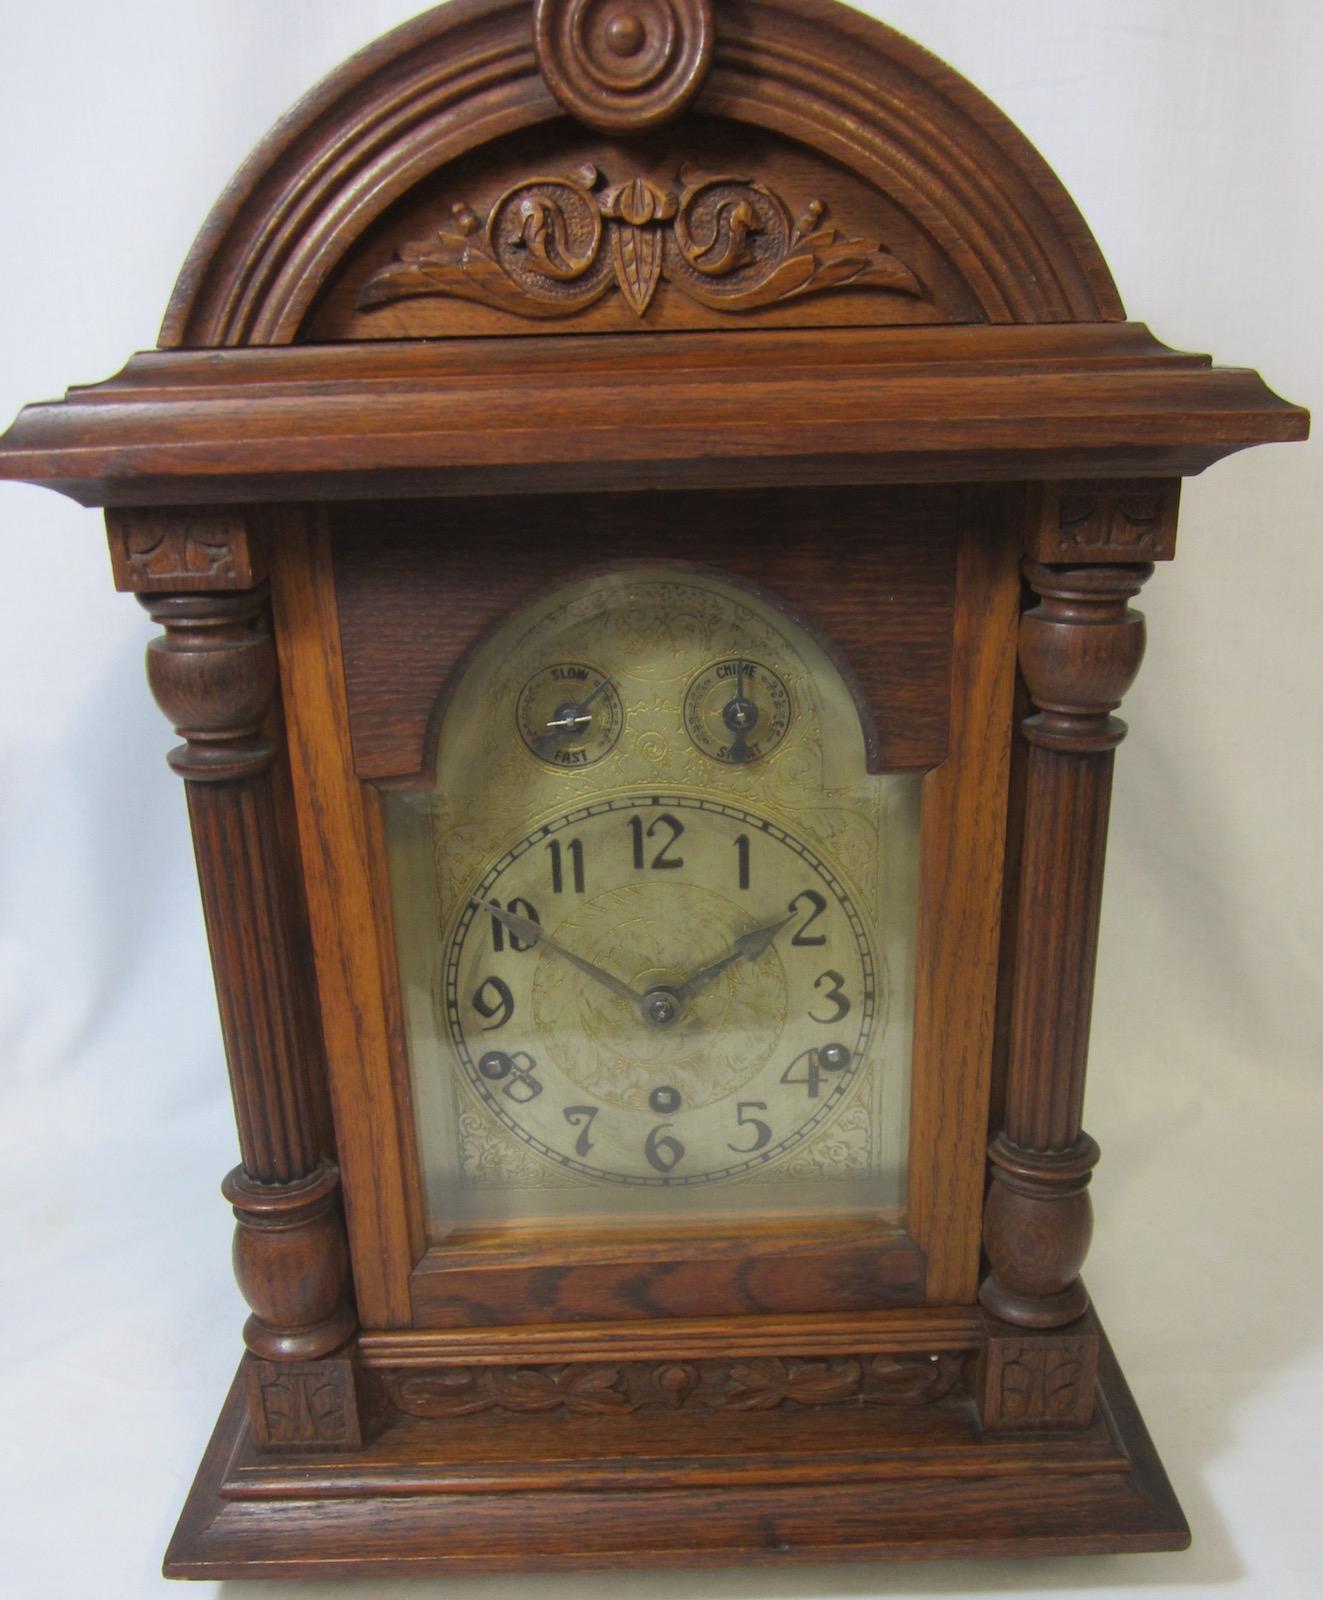 Junghans Westminster Chime bracket clock,
oak case, Germany, circa 1910,
Chimes on the quarters
Measures: 32 x 21 x 46cm high.